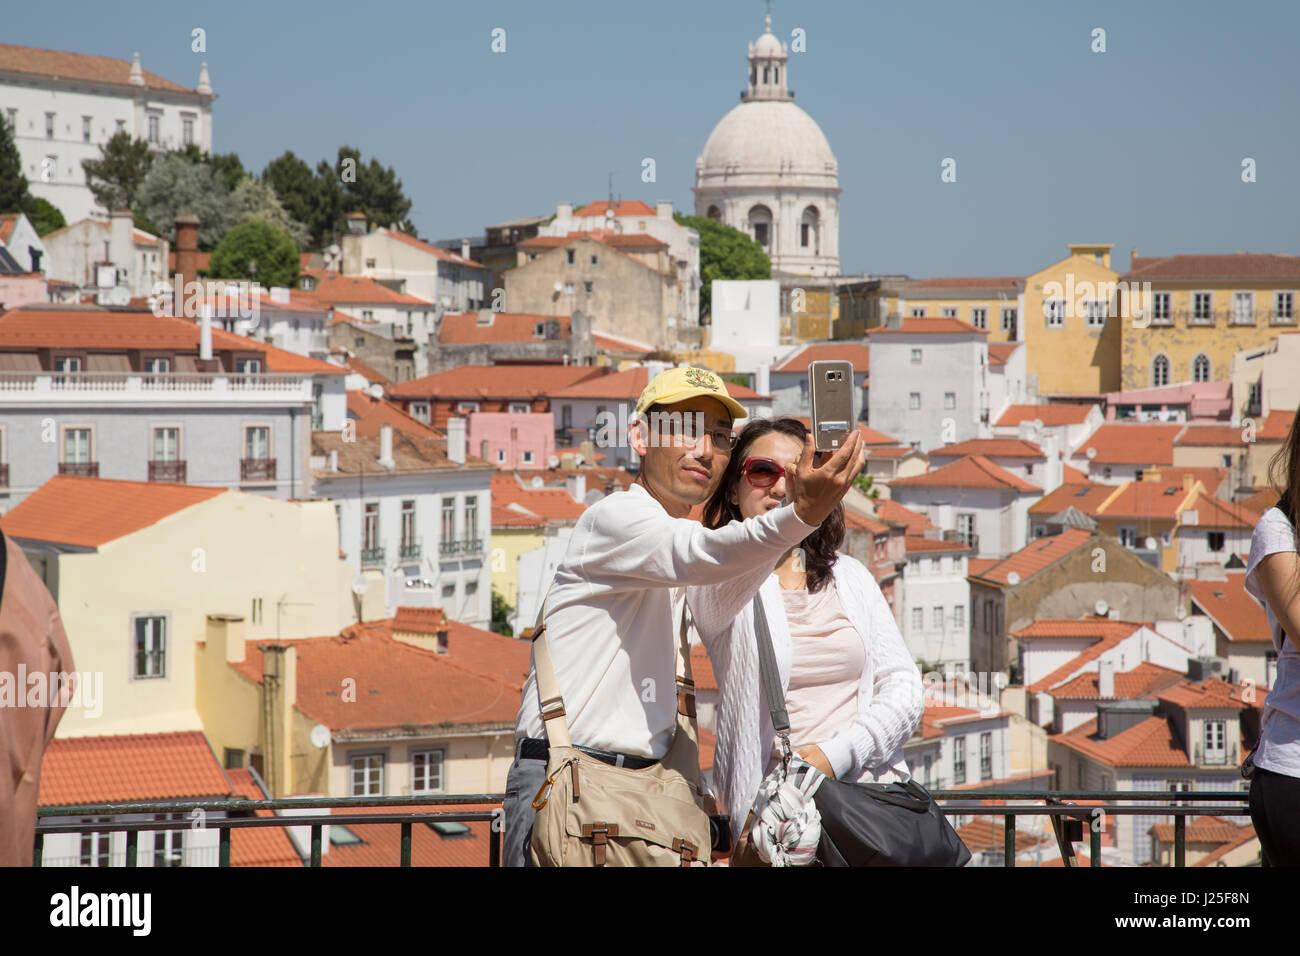 A couple taking a selfie on a mobile phone with the city of Lisbon in the background. Stock Photo